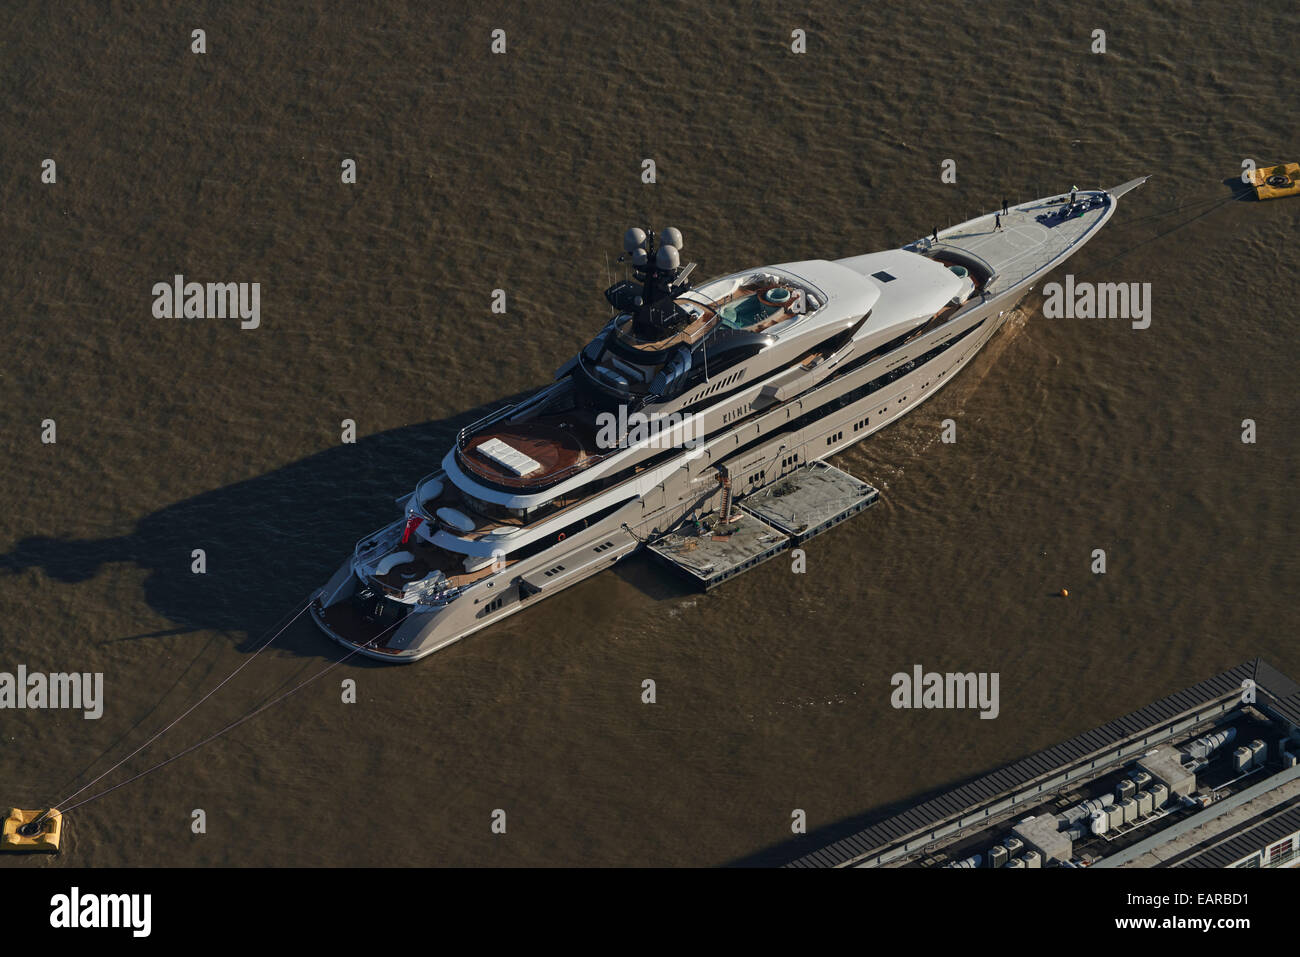 An aerial view of a luxury motor yacht moored on the River Thames Stock Photo